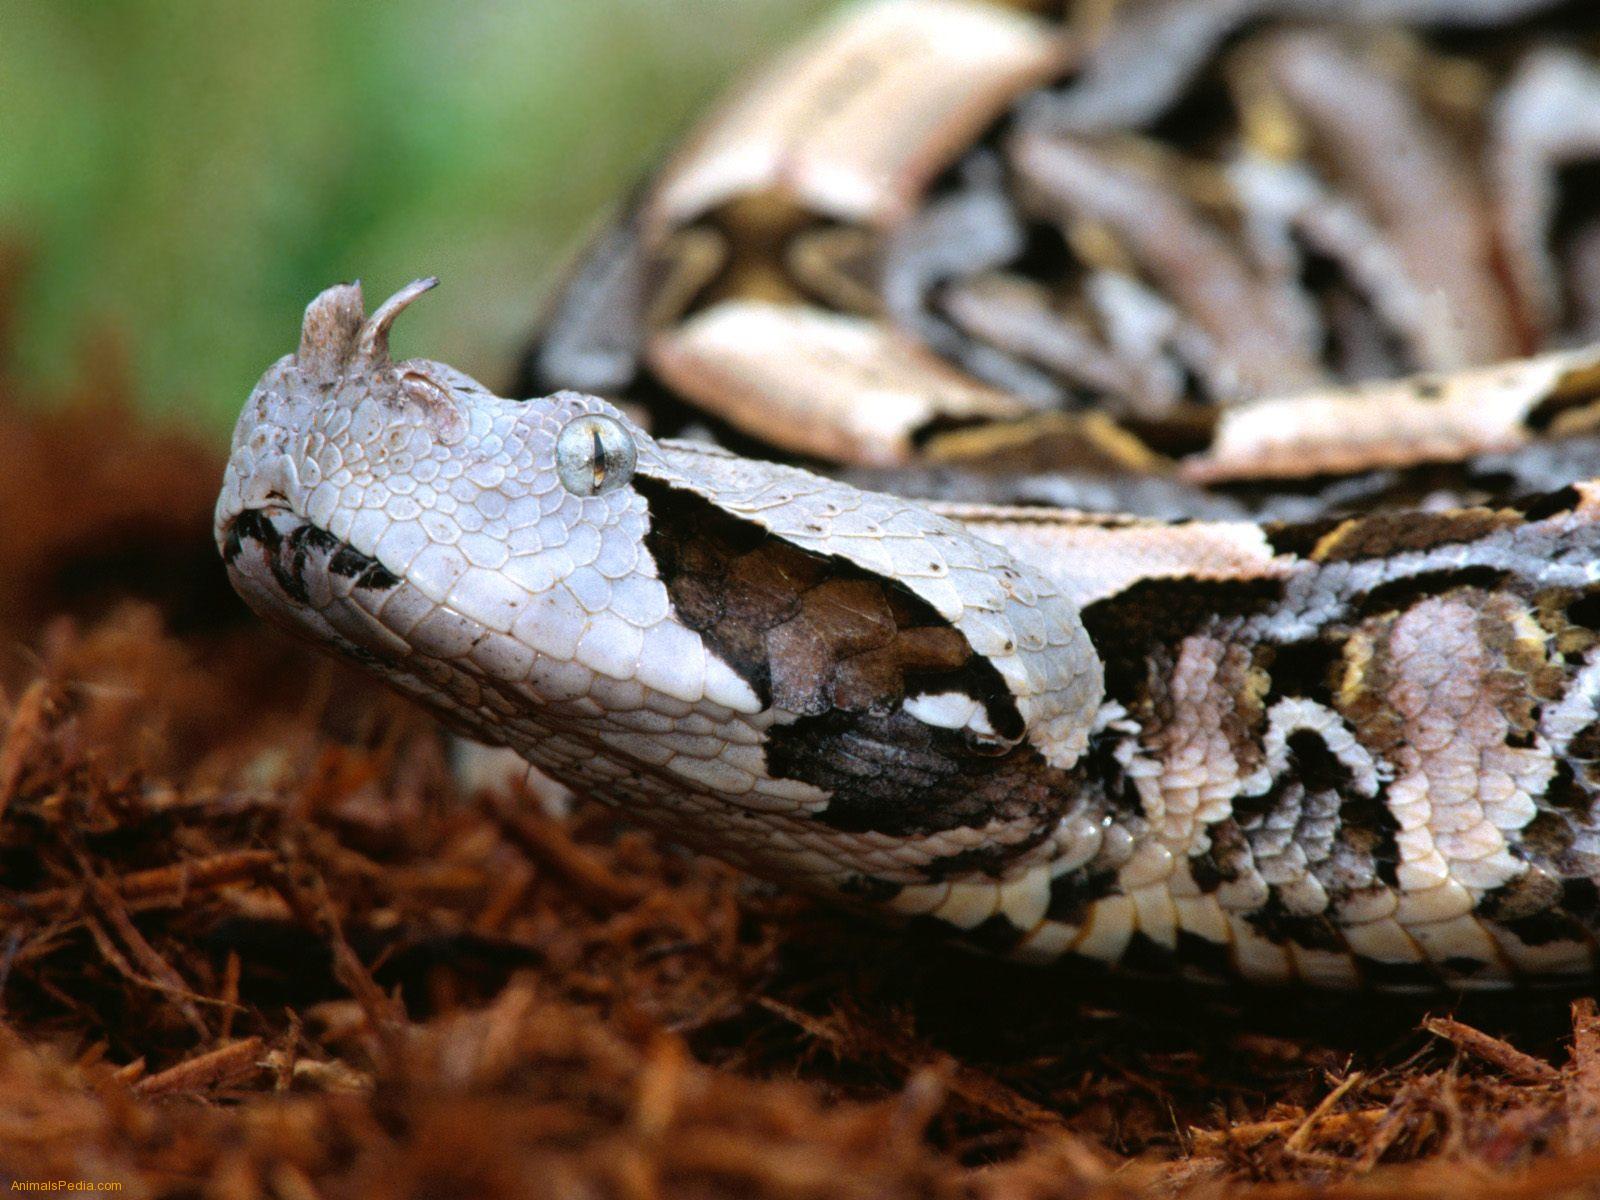 The Gaboon Viper Of Africa Is An Old World And Lacks Heat